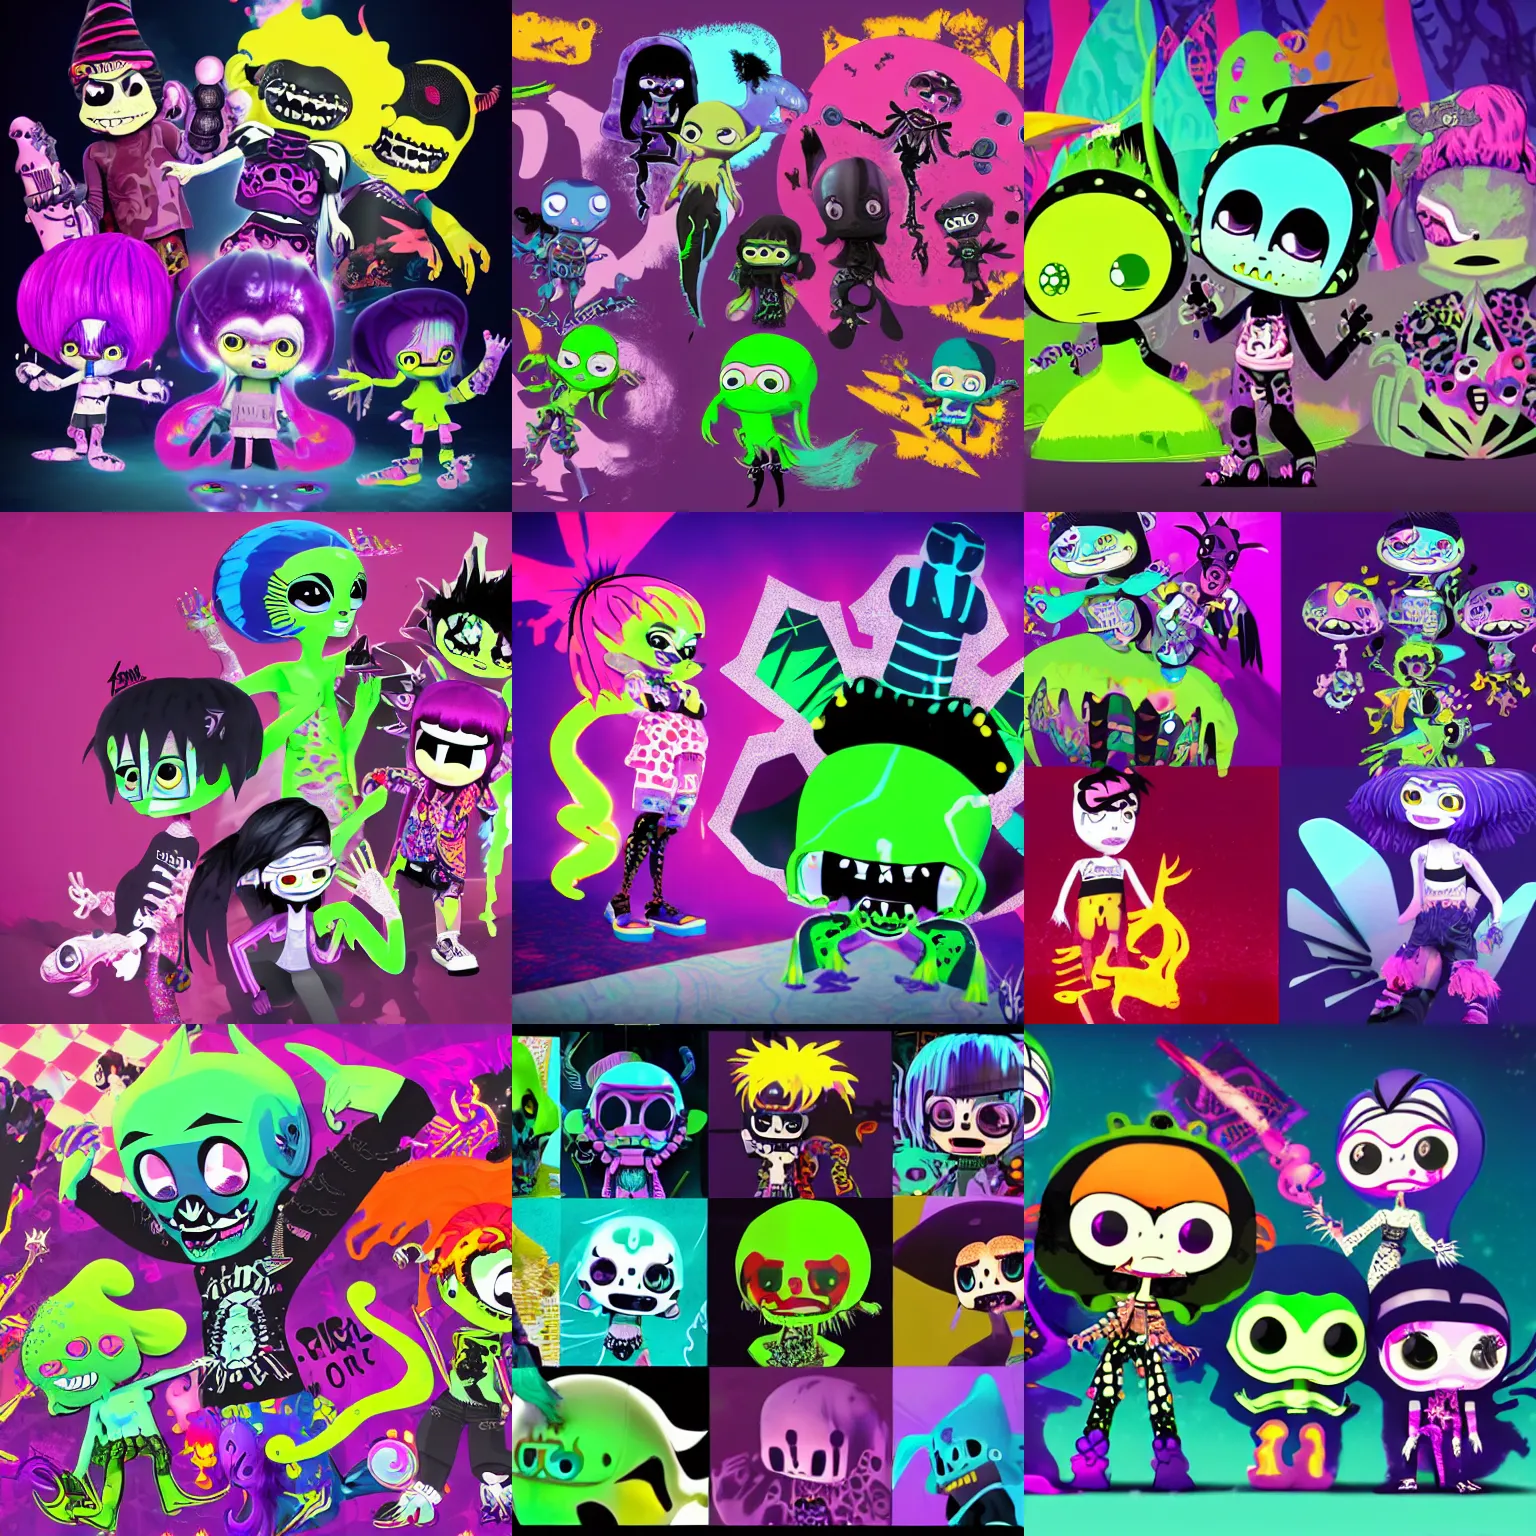 Prompt: CGI lisa frank gothic punk vampiric rockstar underwater caustics vampire squid character designs of various shapes and sizes by genndy tartakovsky and ruby gloom by martin hsu and the creators of fret nice at pieces interactive and splatoon by nintendo being overseen by Jamie Hewlett from gorillaz for splatoon by nintendo